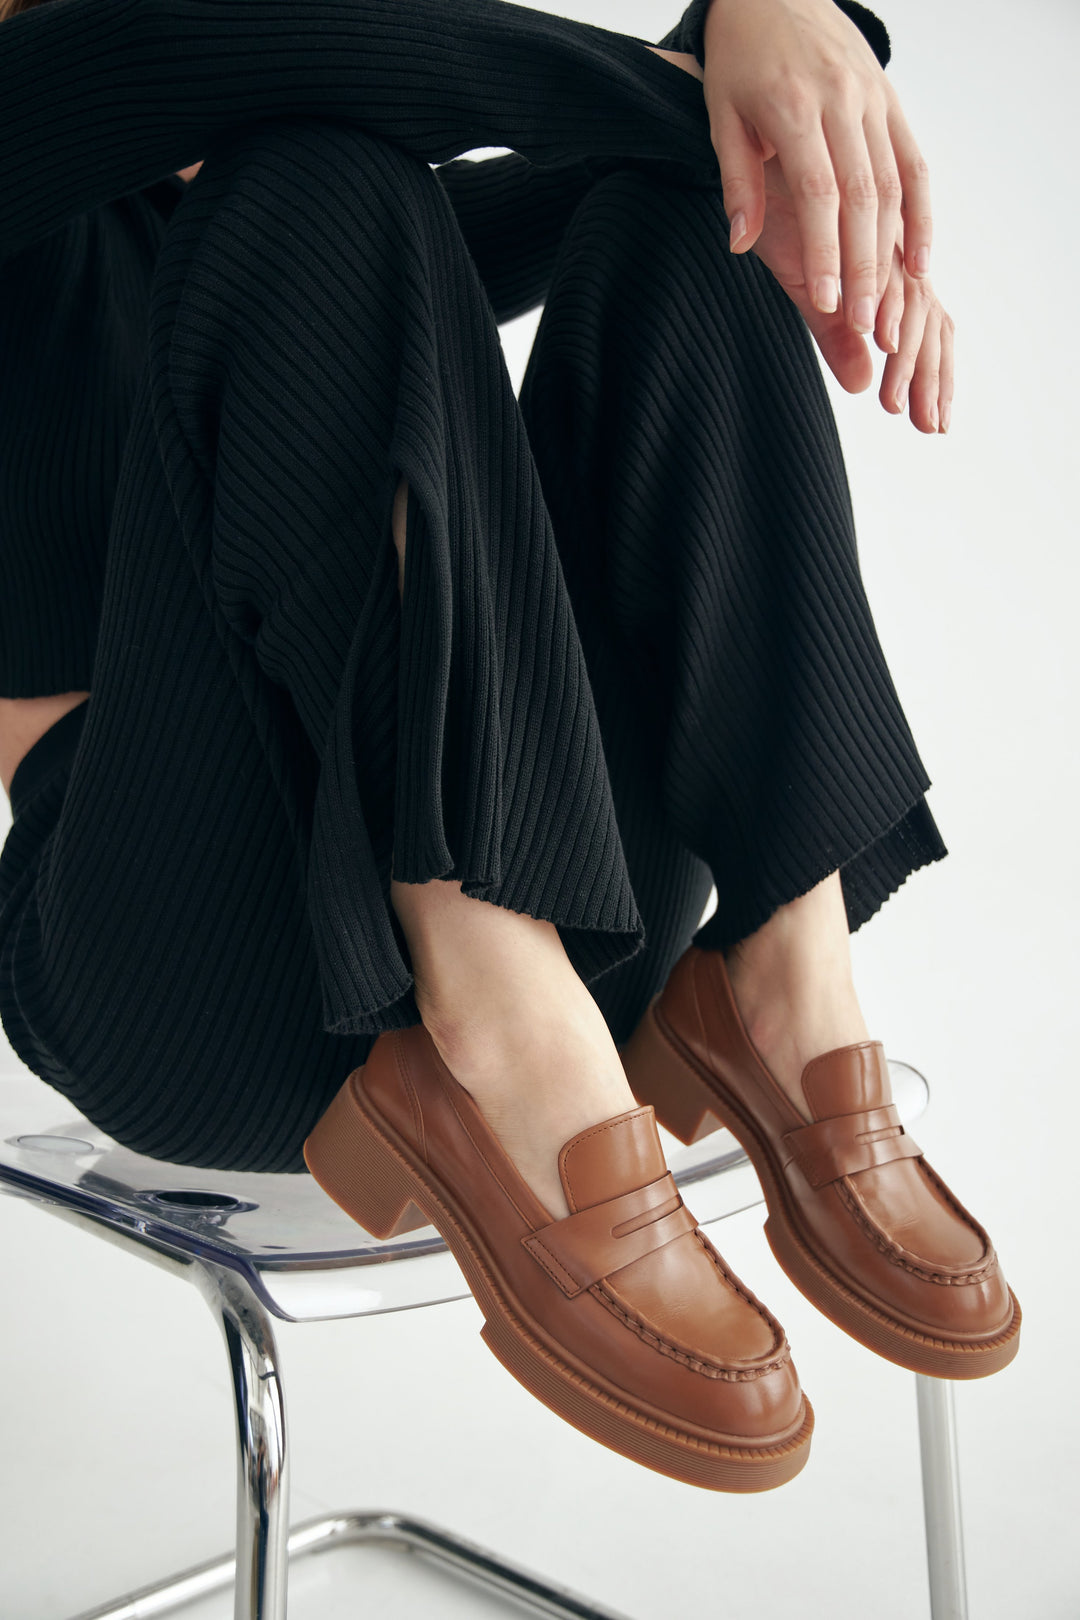 Women's moccasins made of genuine leather in brown by Estro - close-up on details.